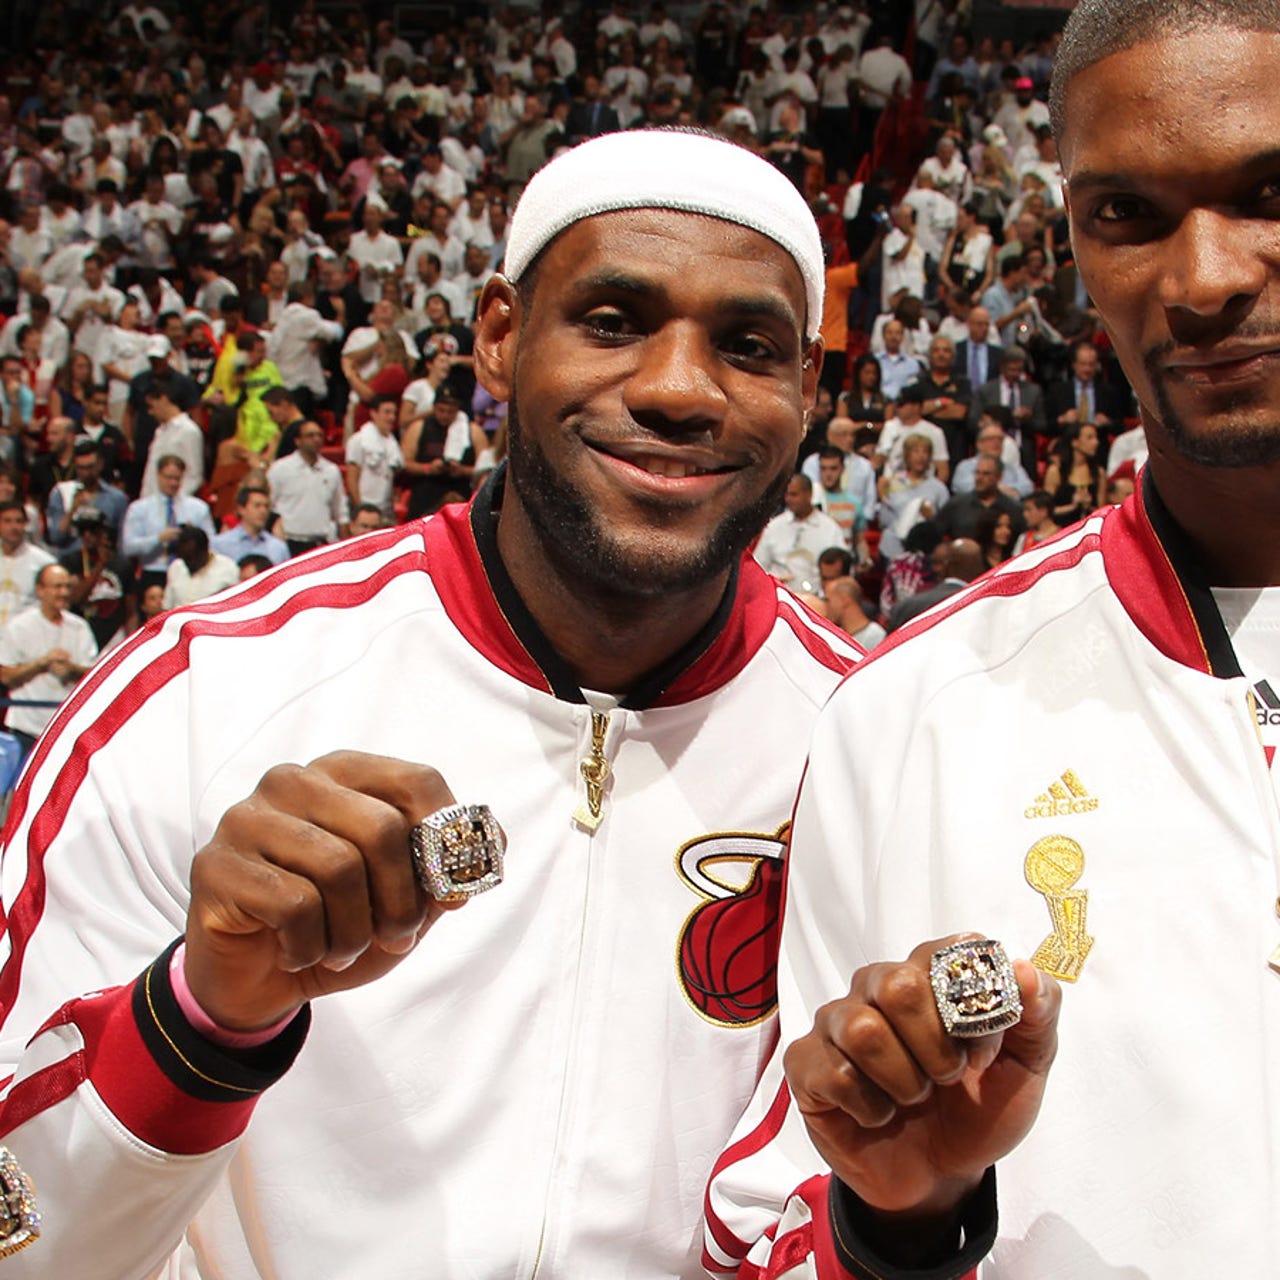 Chris Bosh Explains What Made Him Team Up With LeBron & D-Wade